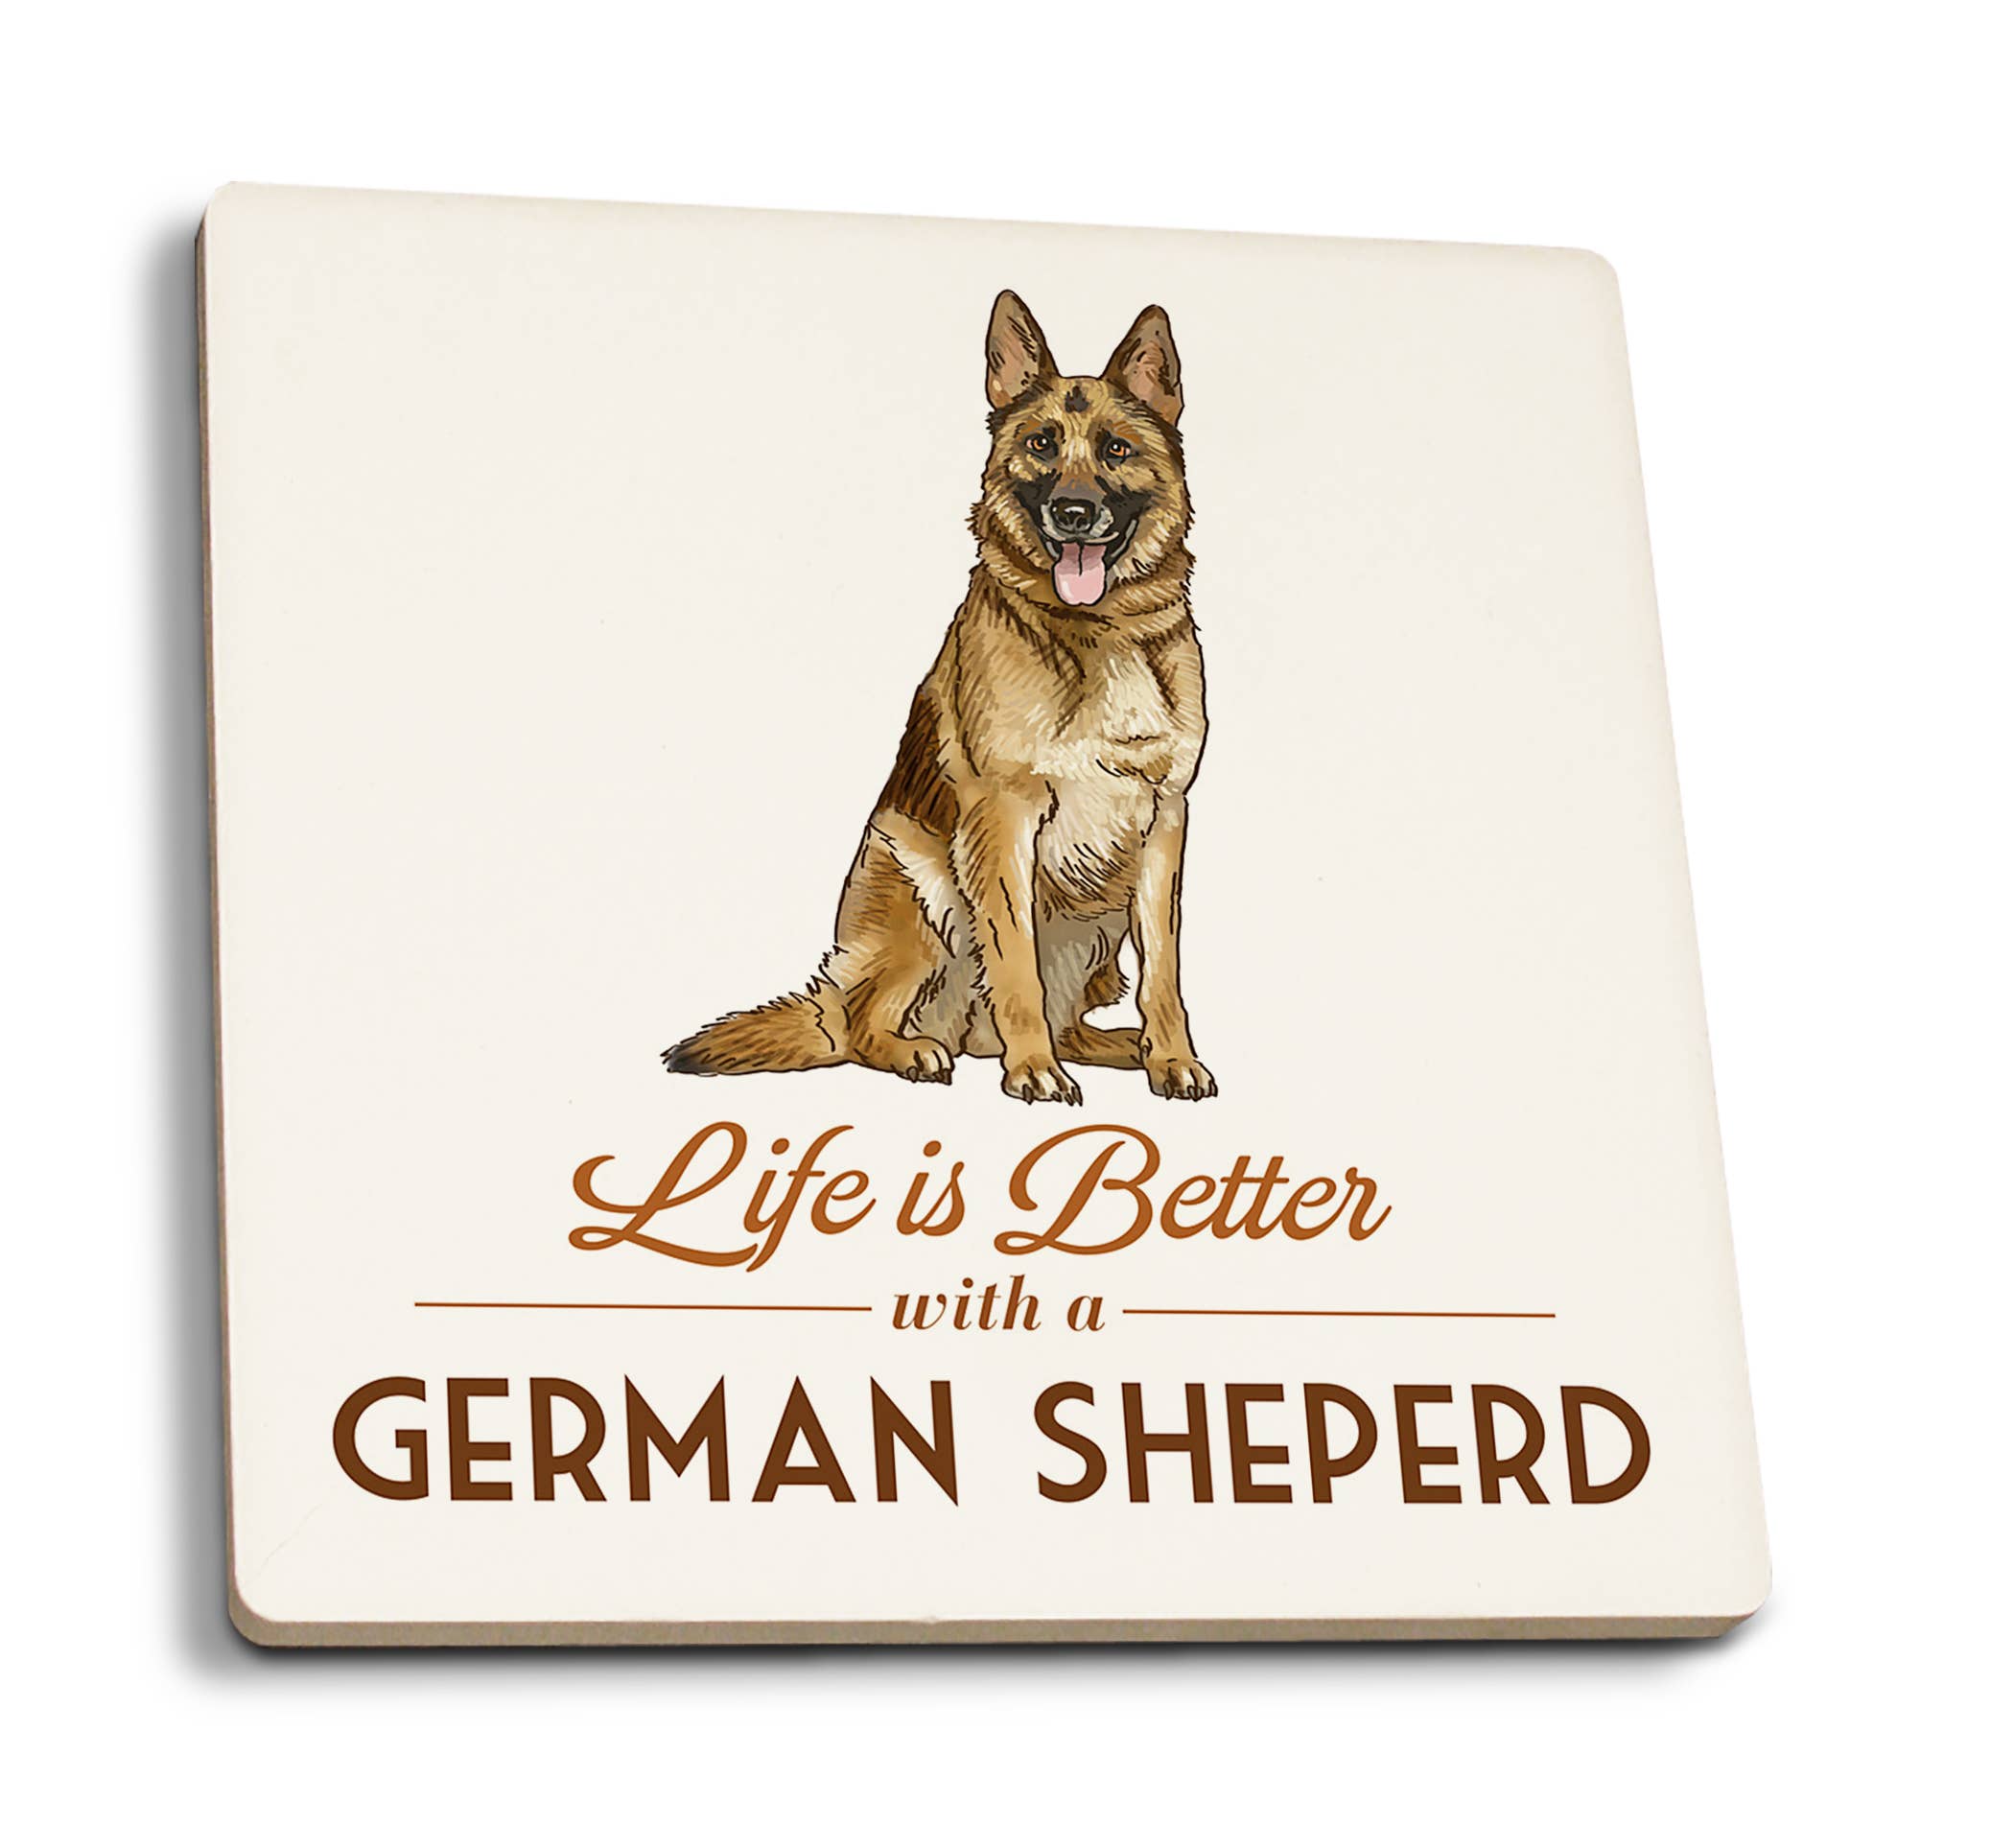 German Shepard IN STOCK ready to ship K-Cup Holder